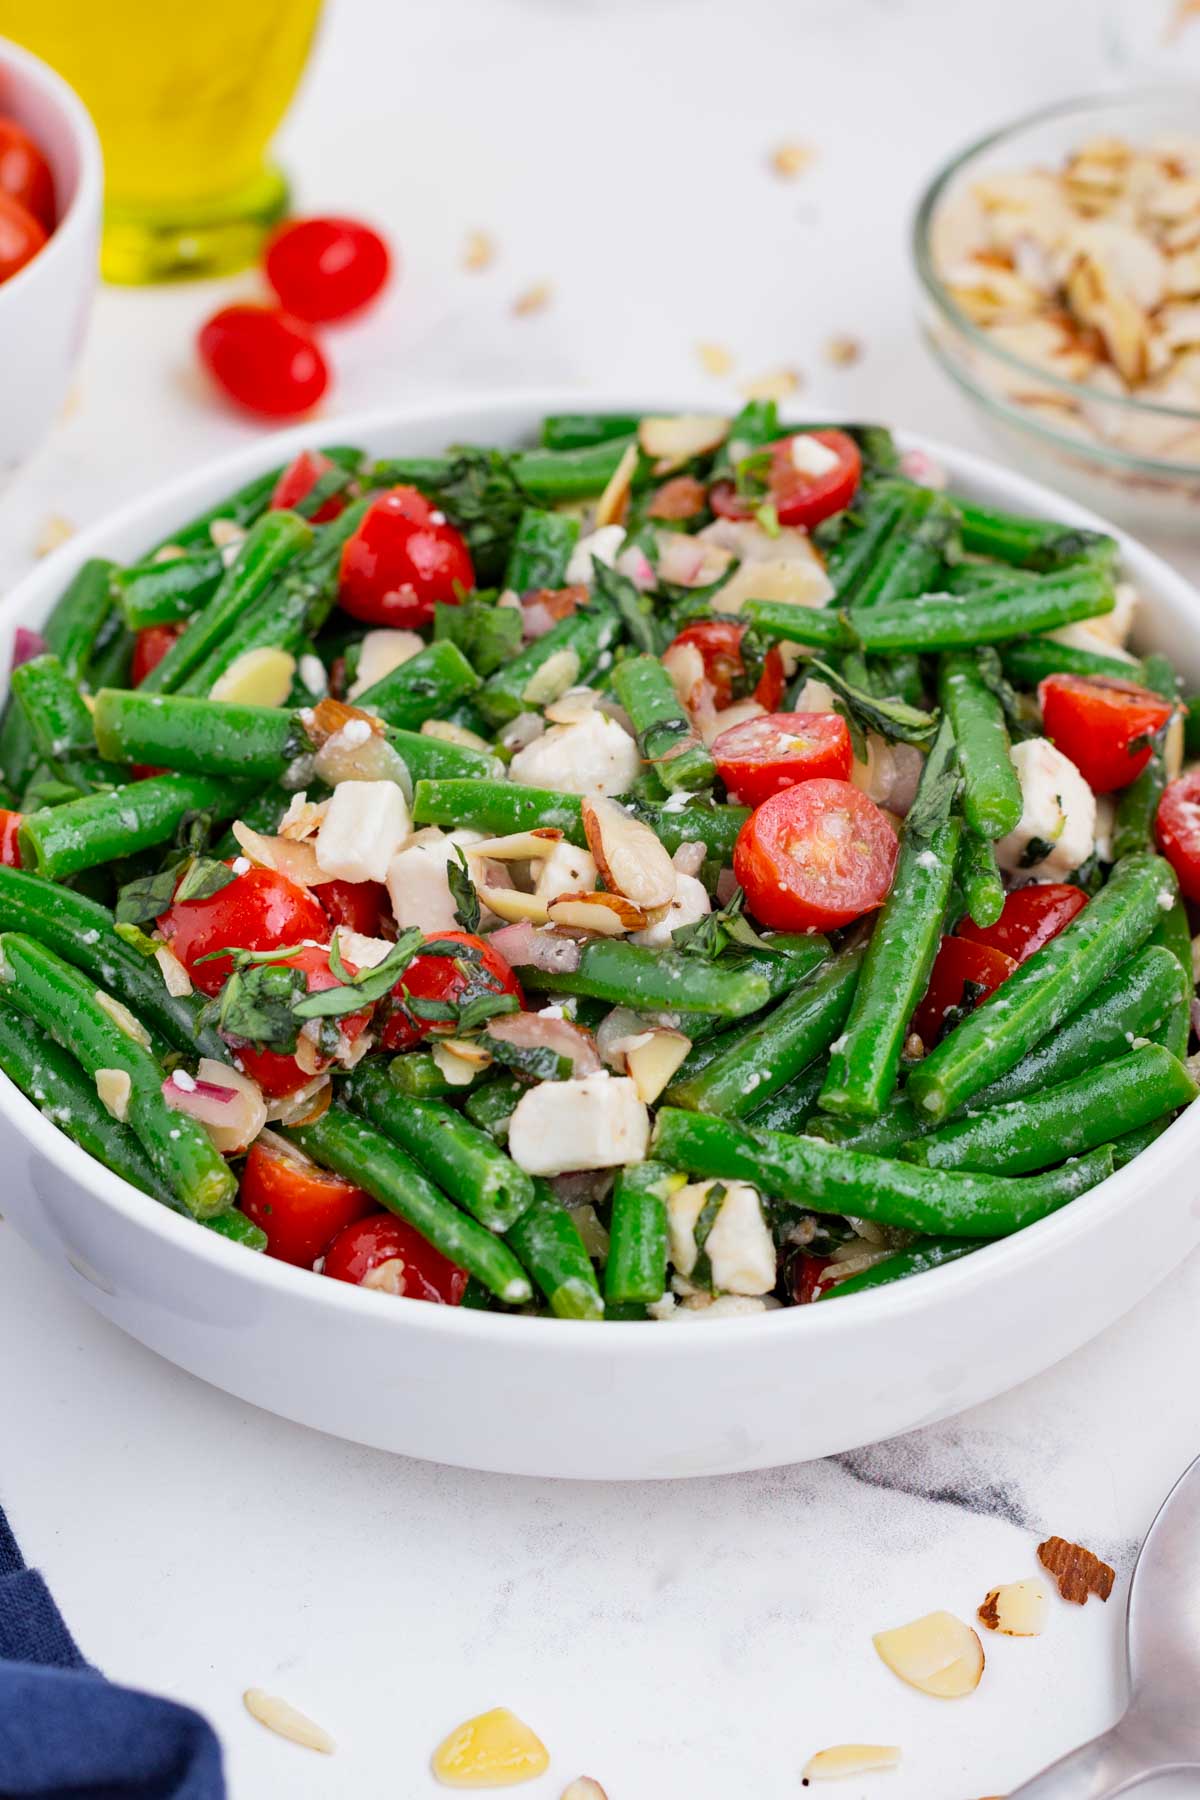 Green bean salad is a healthy and tasty recipe for the summer months.